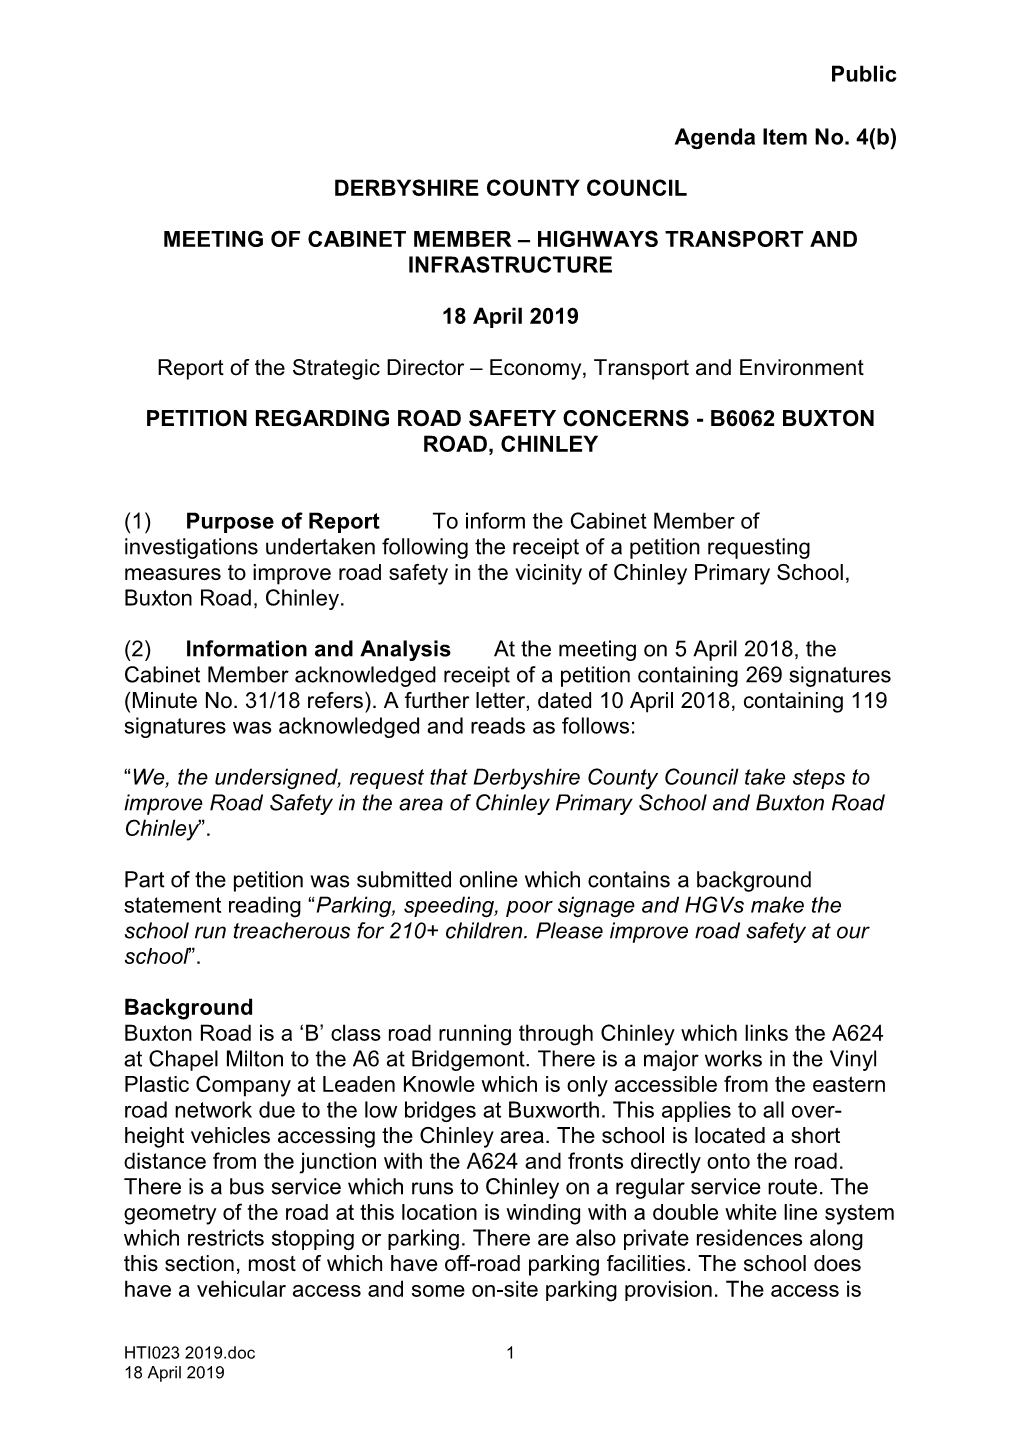 2019-04-18 Petition Regarding Road Safety Concerns B6062 Buxton